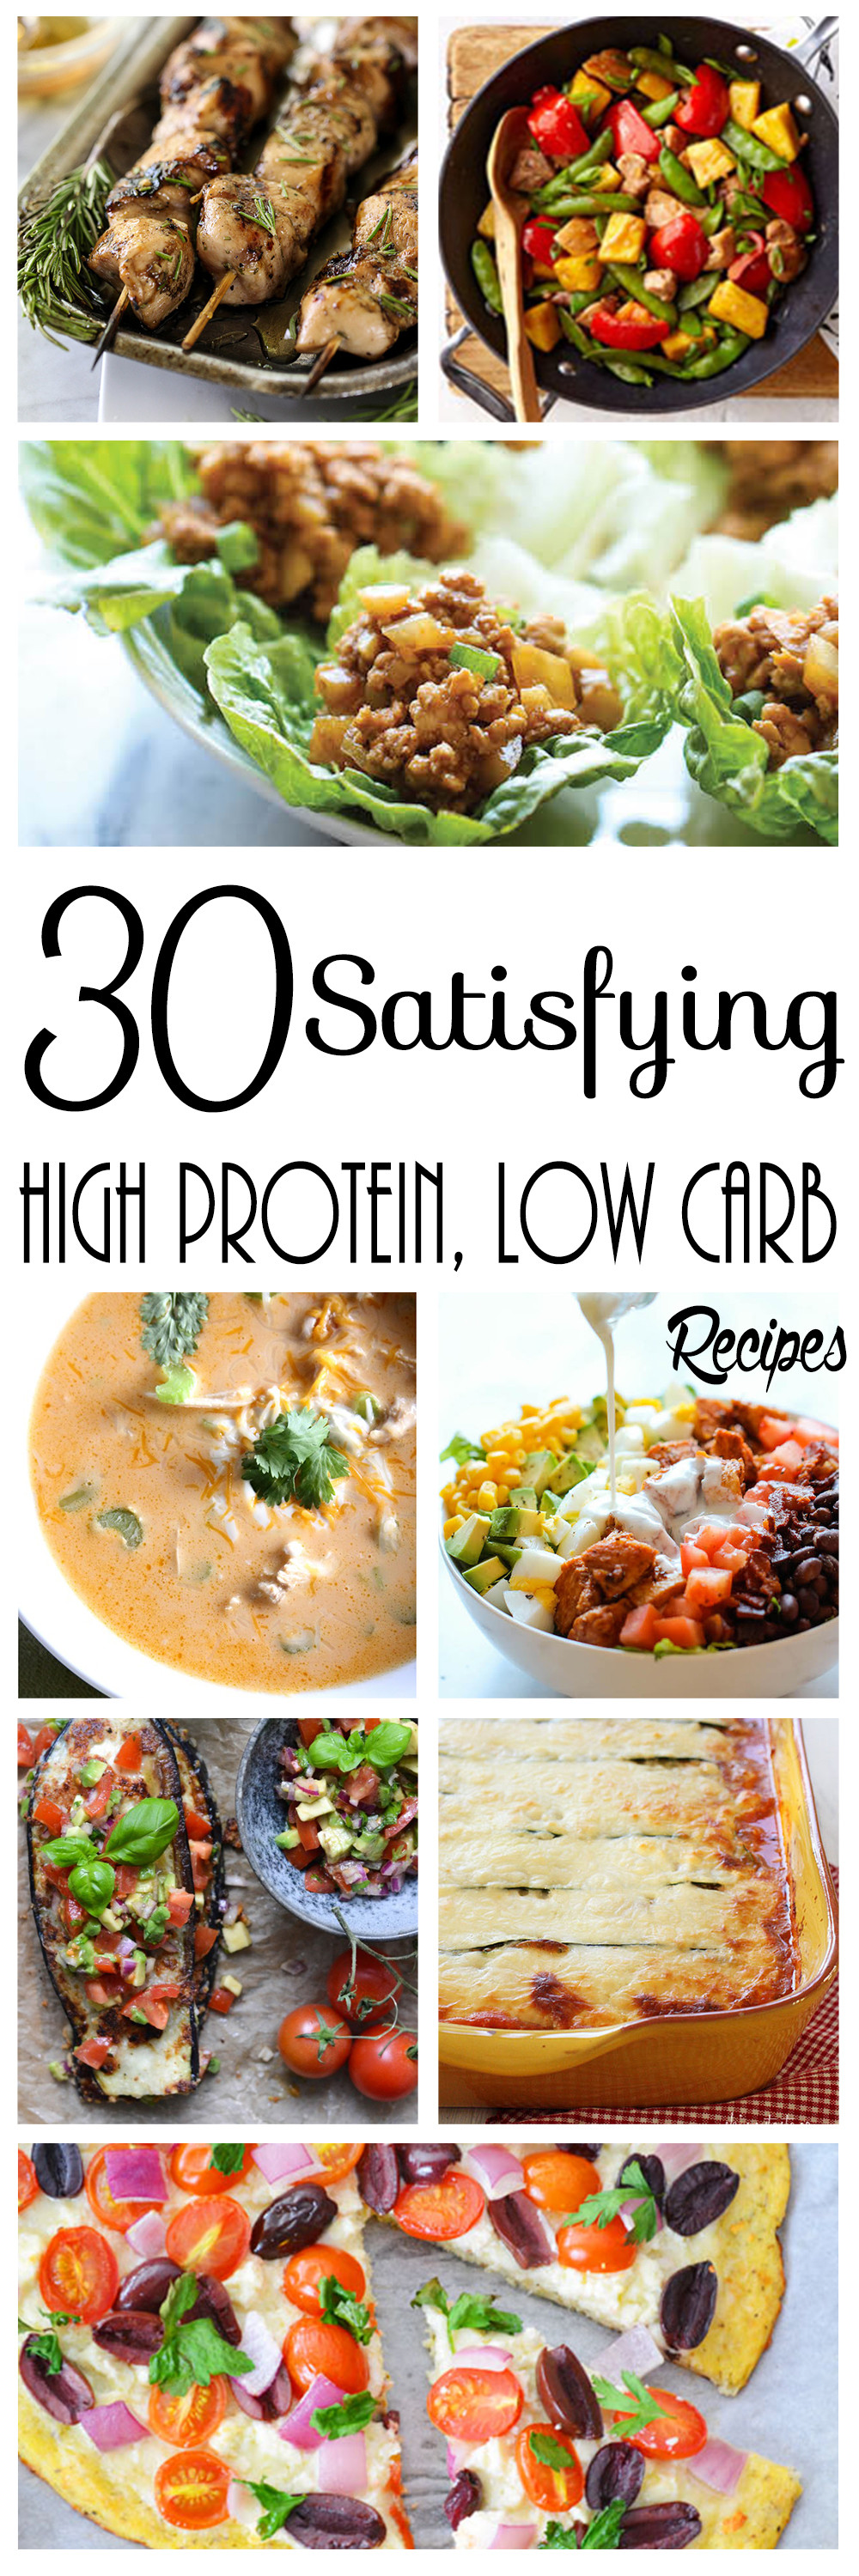 High Protein Low Carb Recipes
 30 Satisfying High Protein Low Carb Recipes FULL